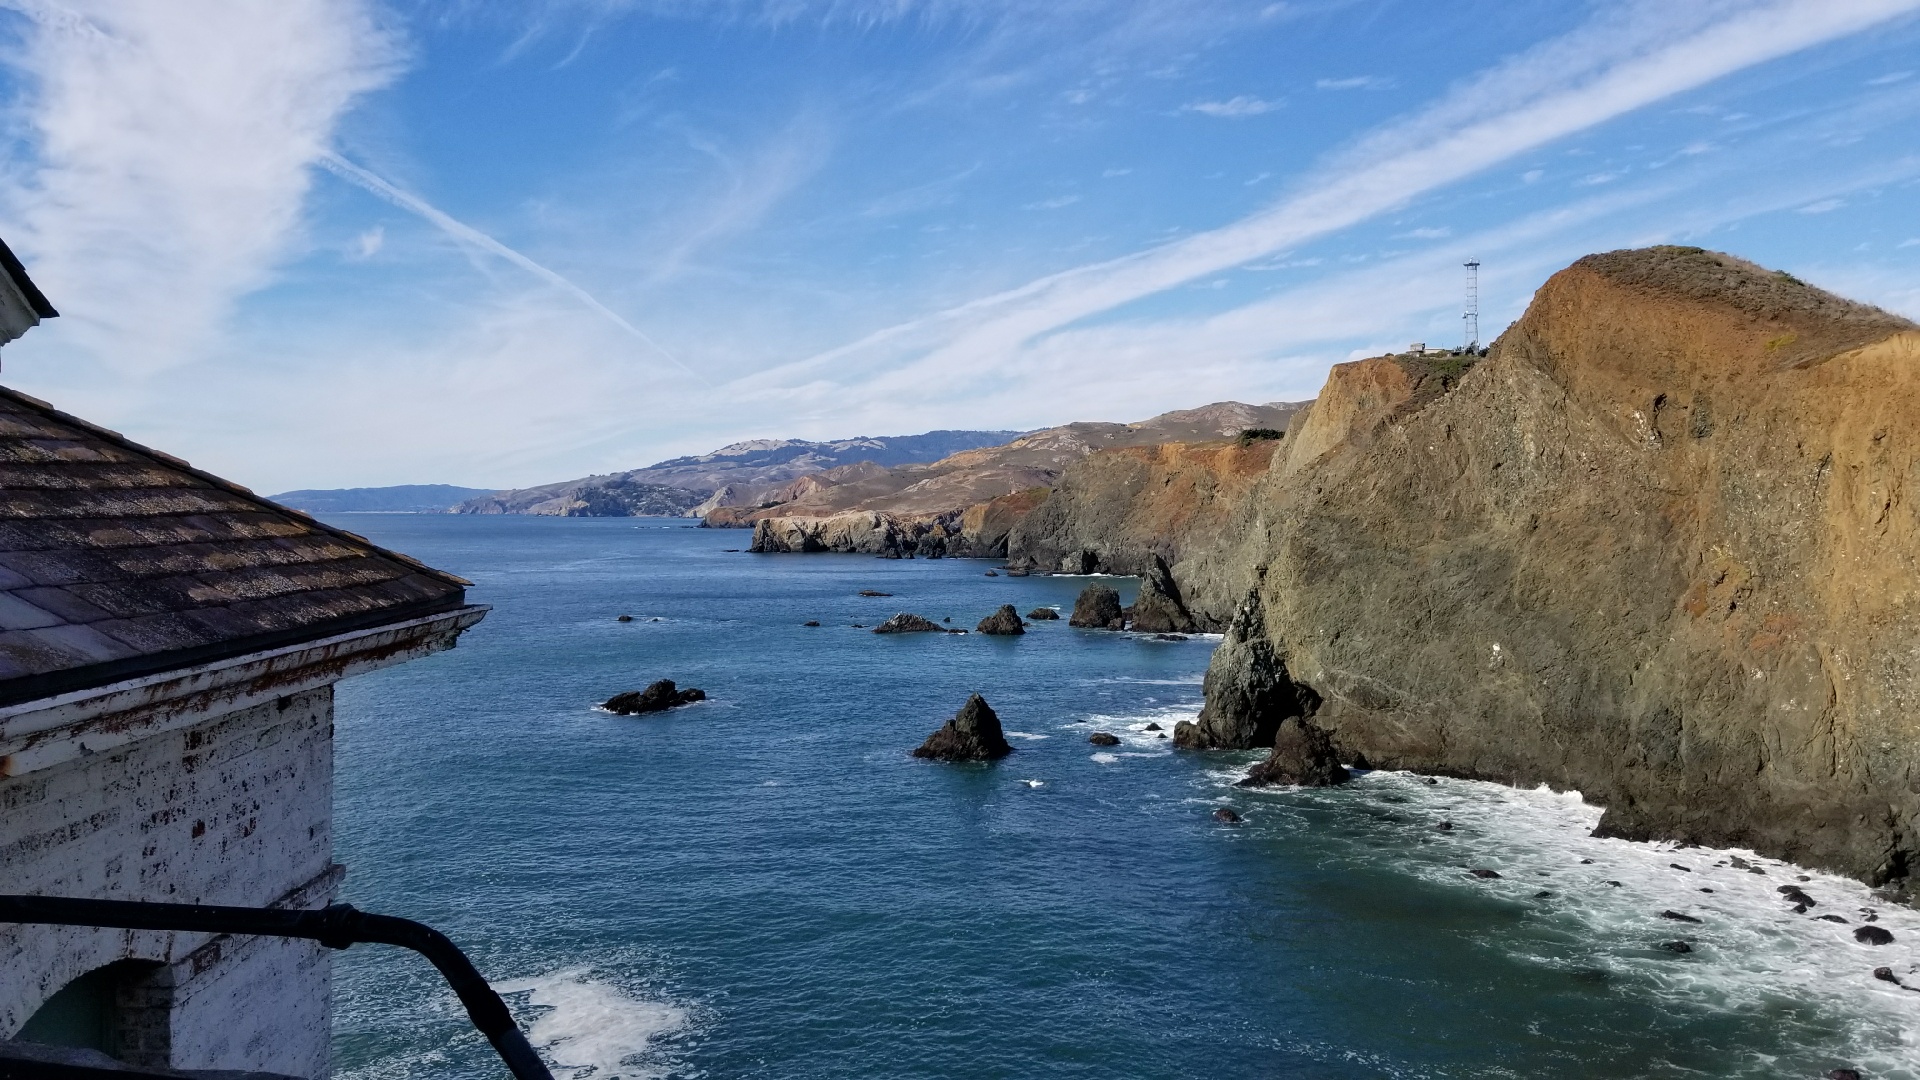 View from Point Bonita Lighthouse looking west at Pacific Ocean and along Marin Headlands coast. Photo credit NPS/LElze.